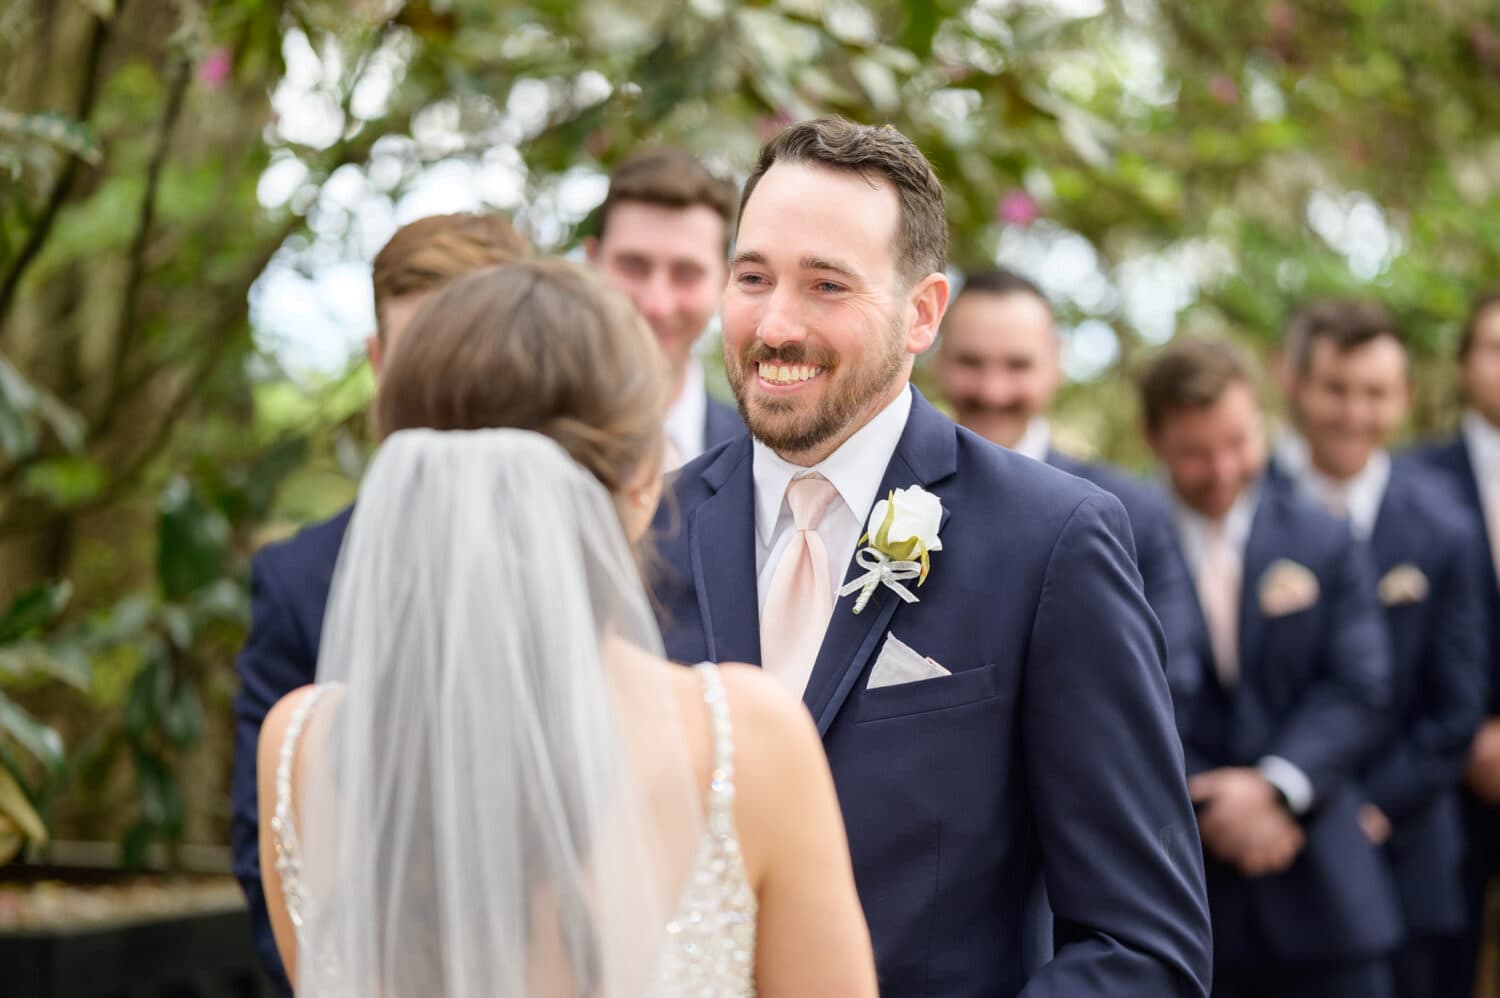 Groom smiling at bride during the ceremony - Caledonia Golf & Fish Club